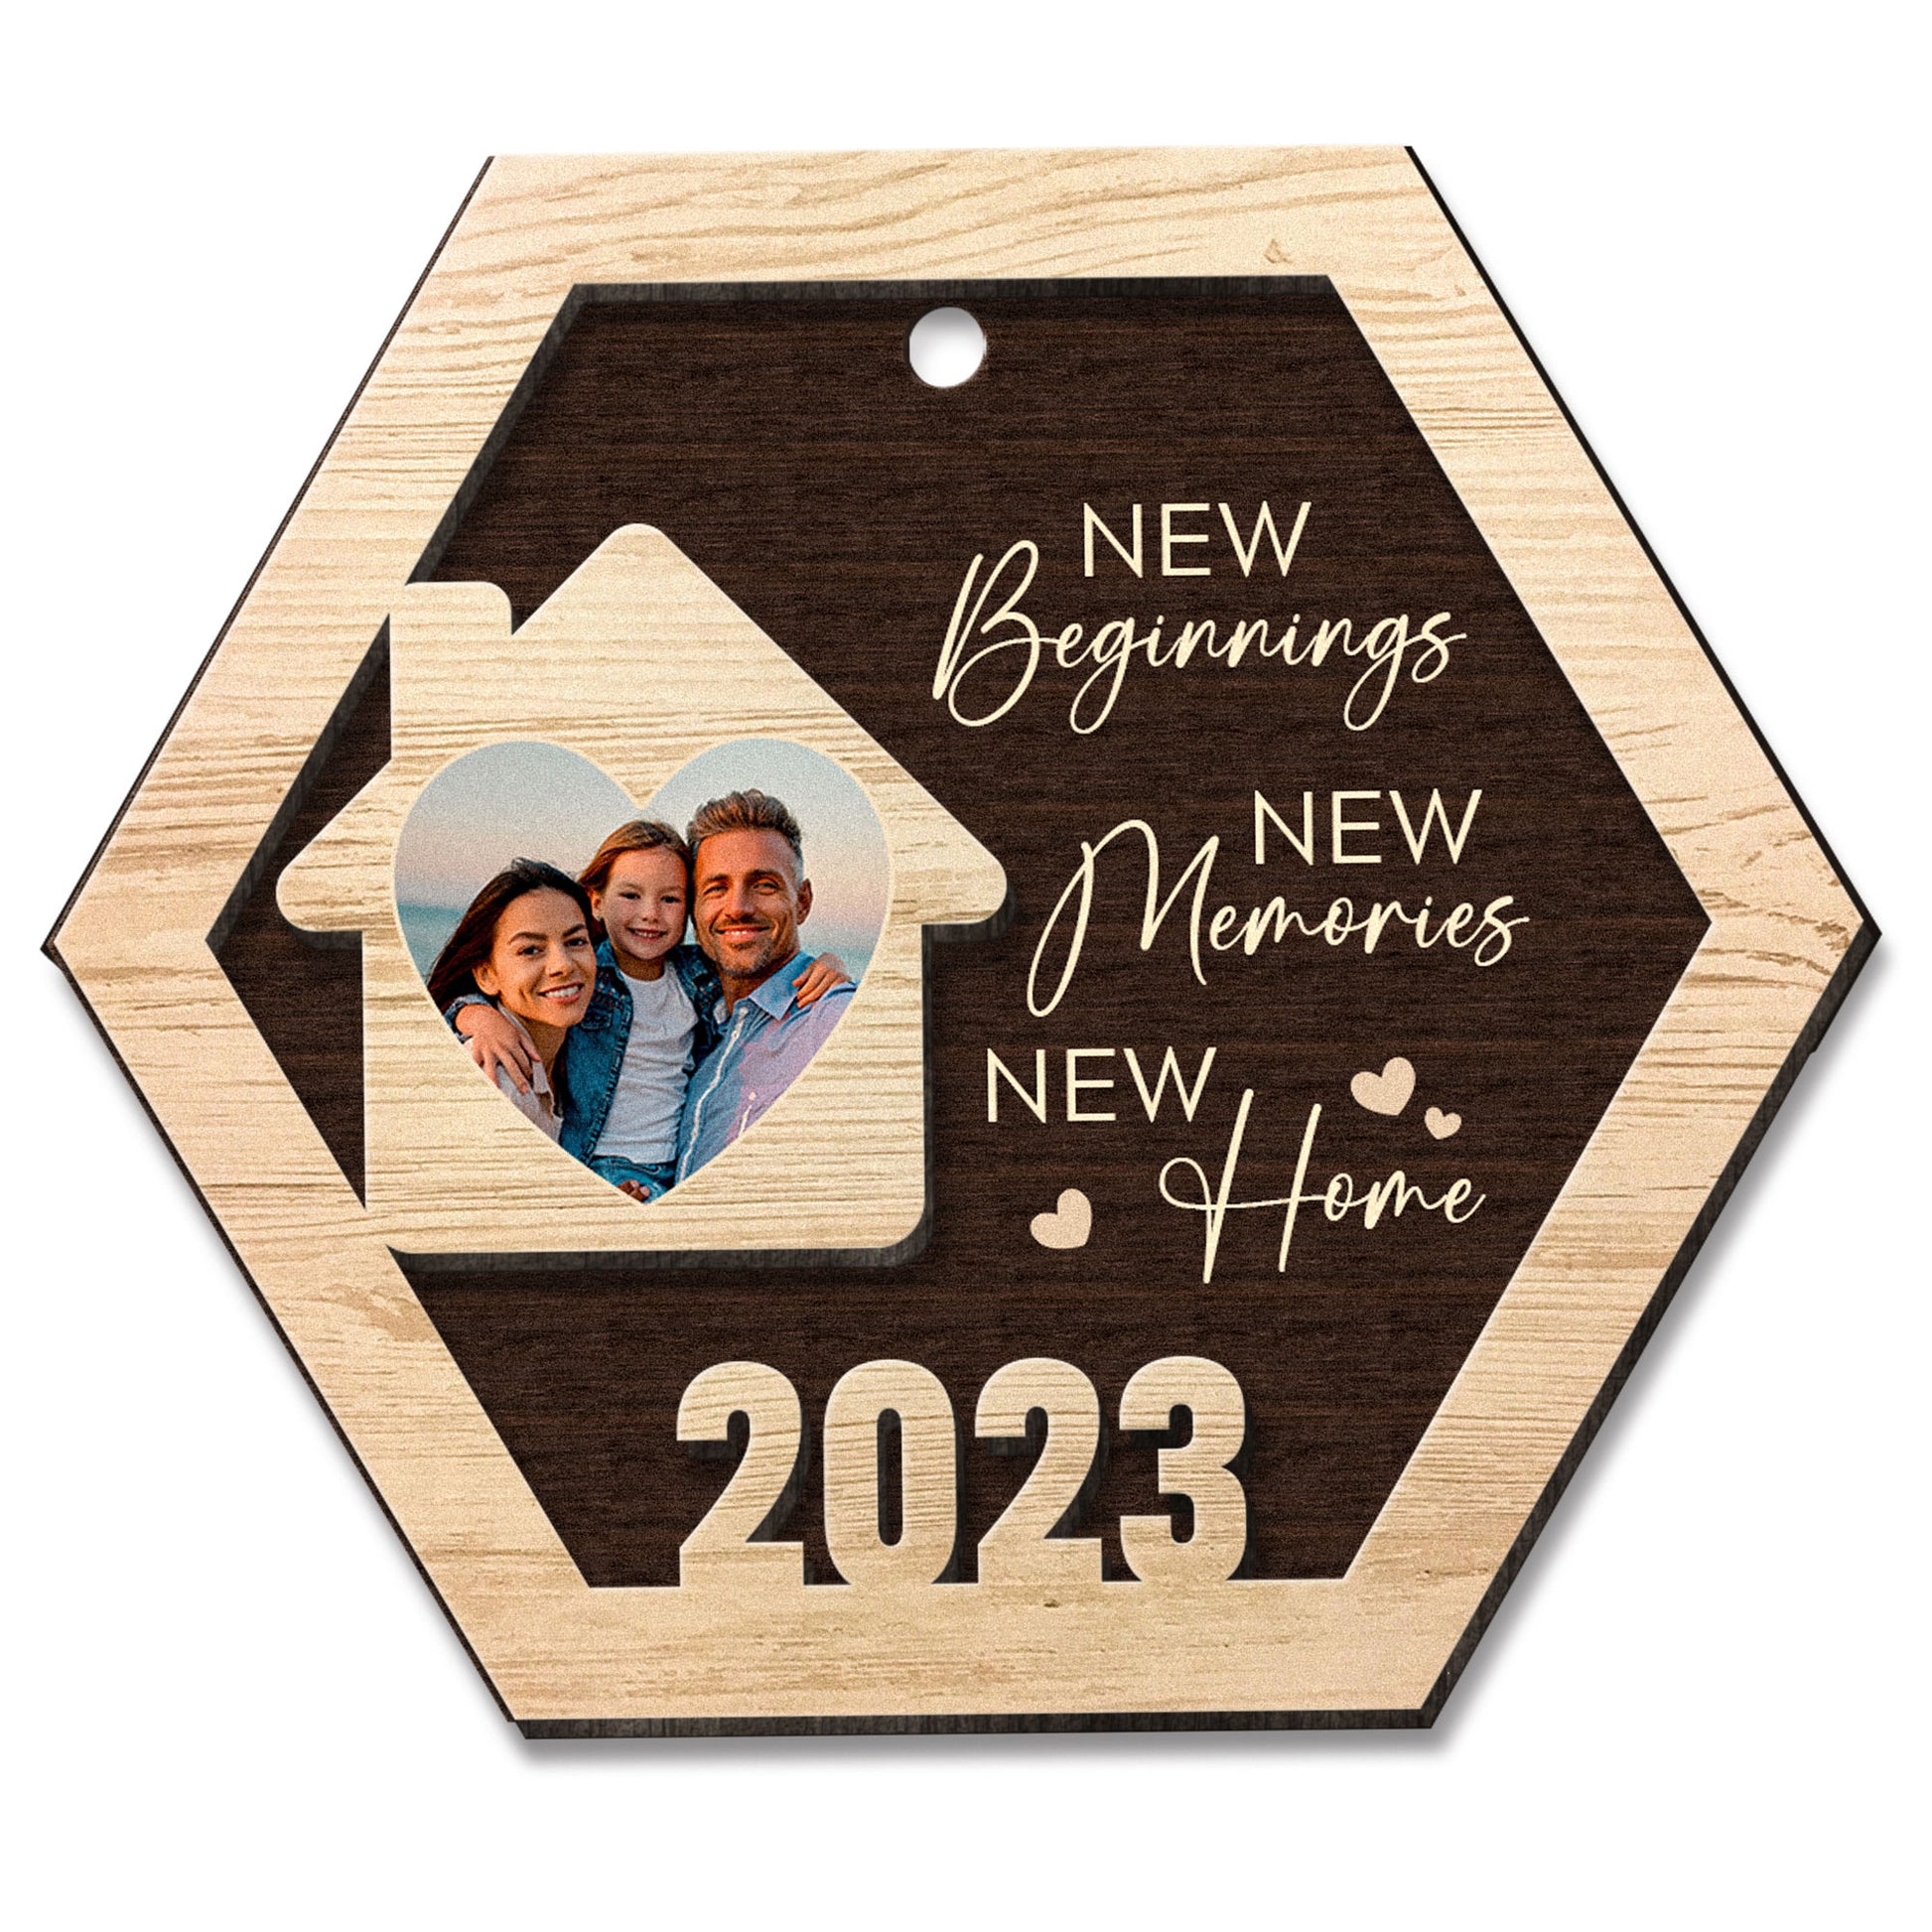 1pc,New Beginnings New memories,New Home 2023,House Warming Gifts